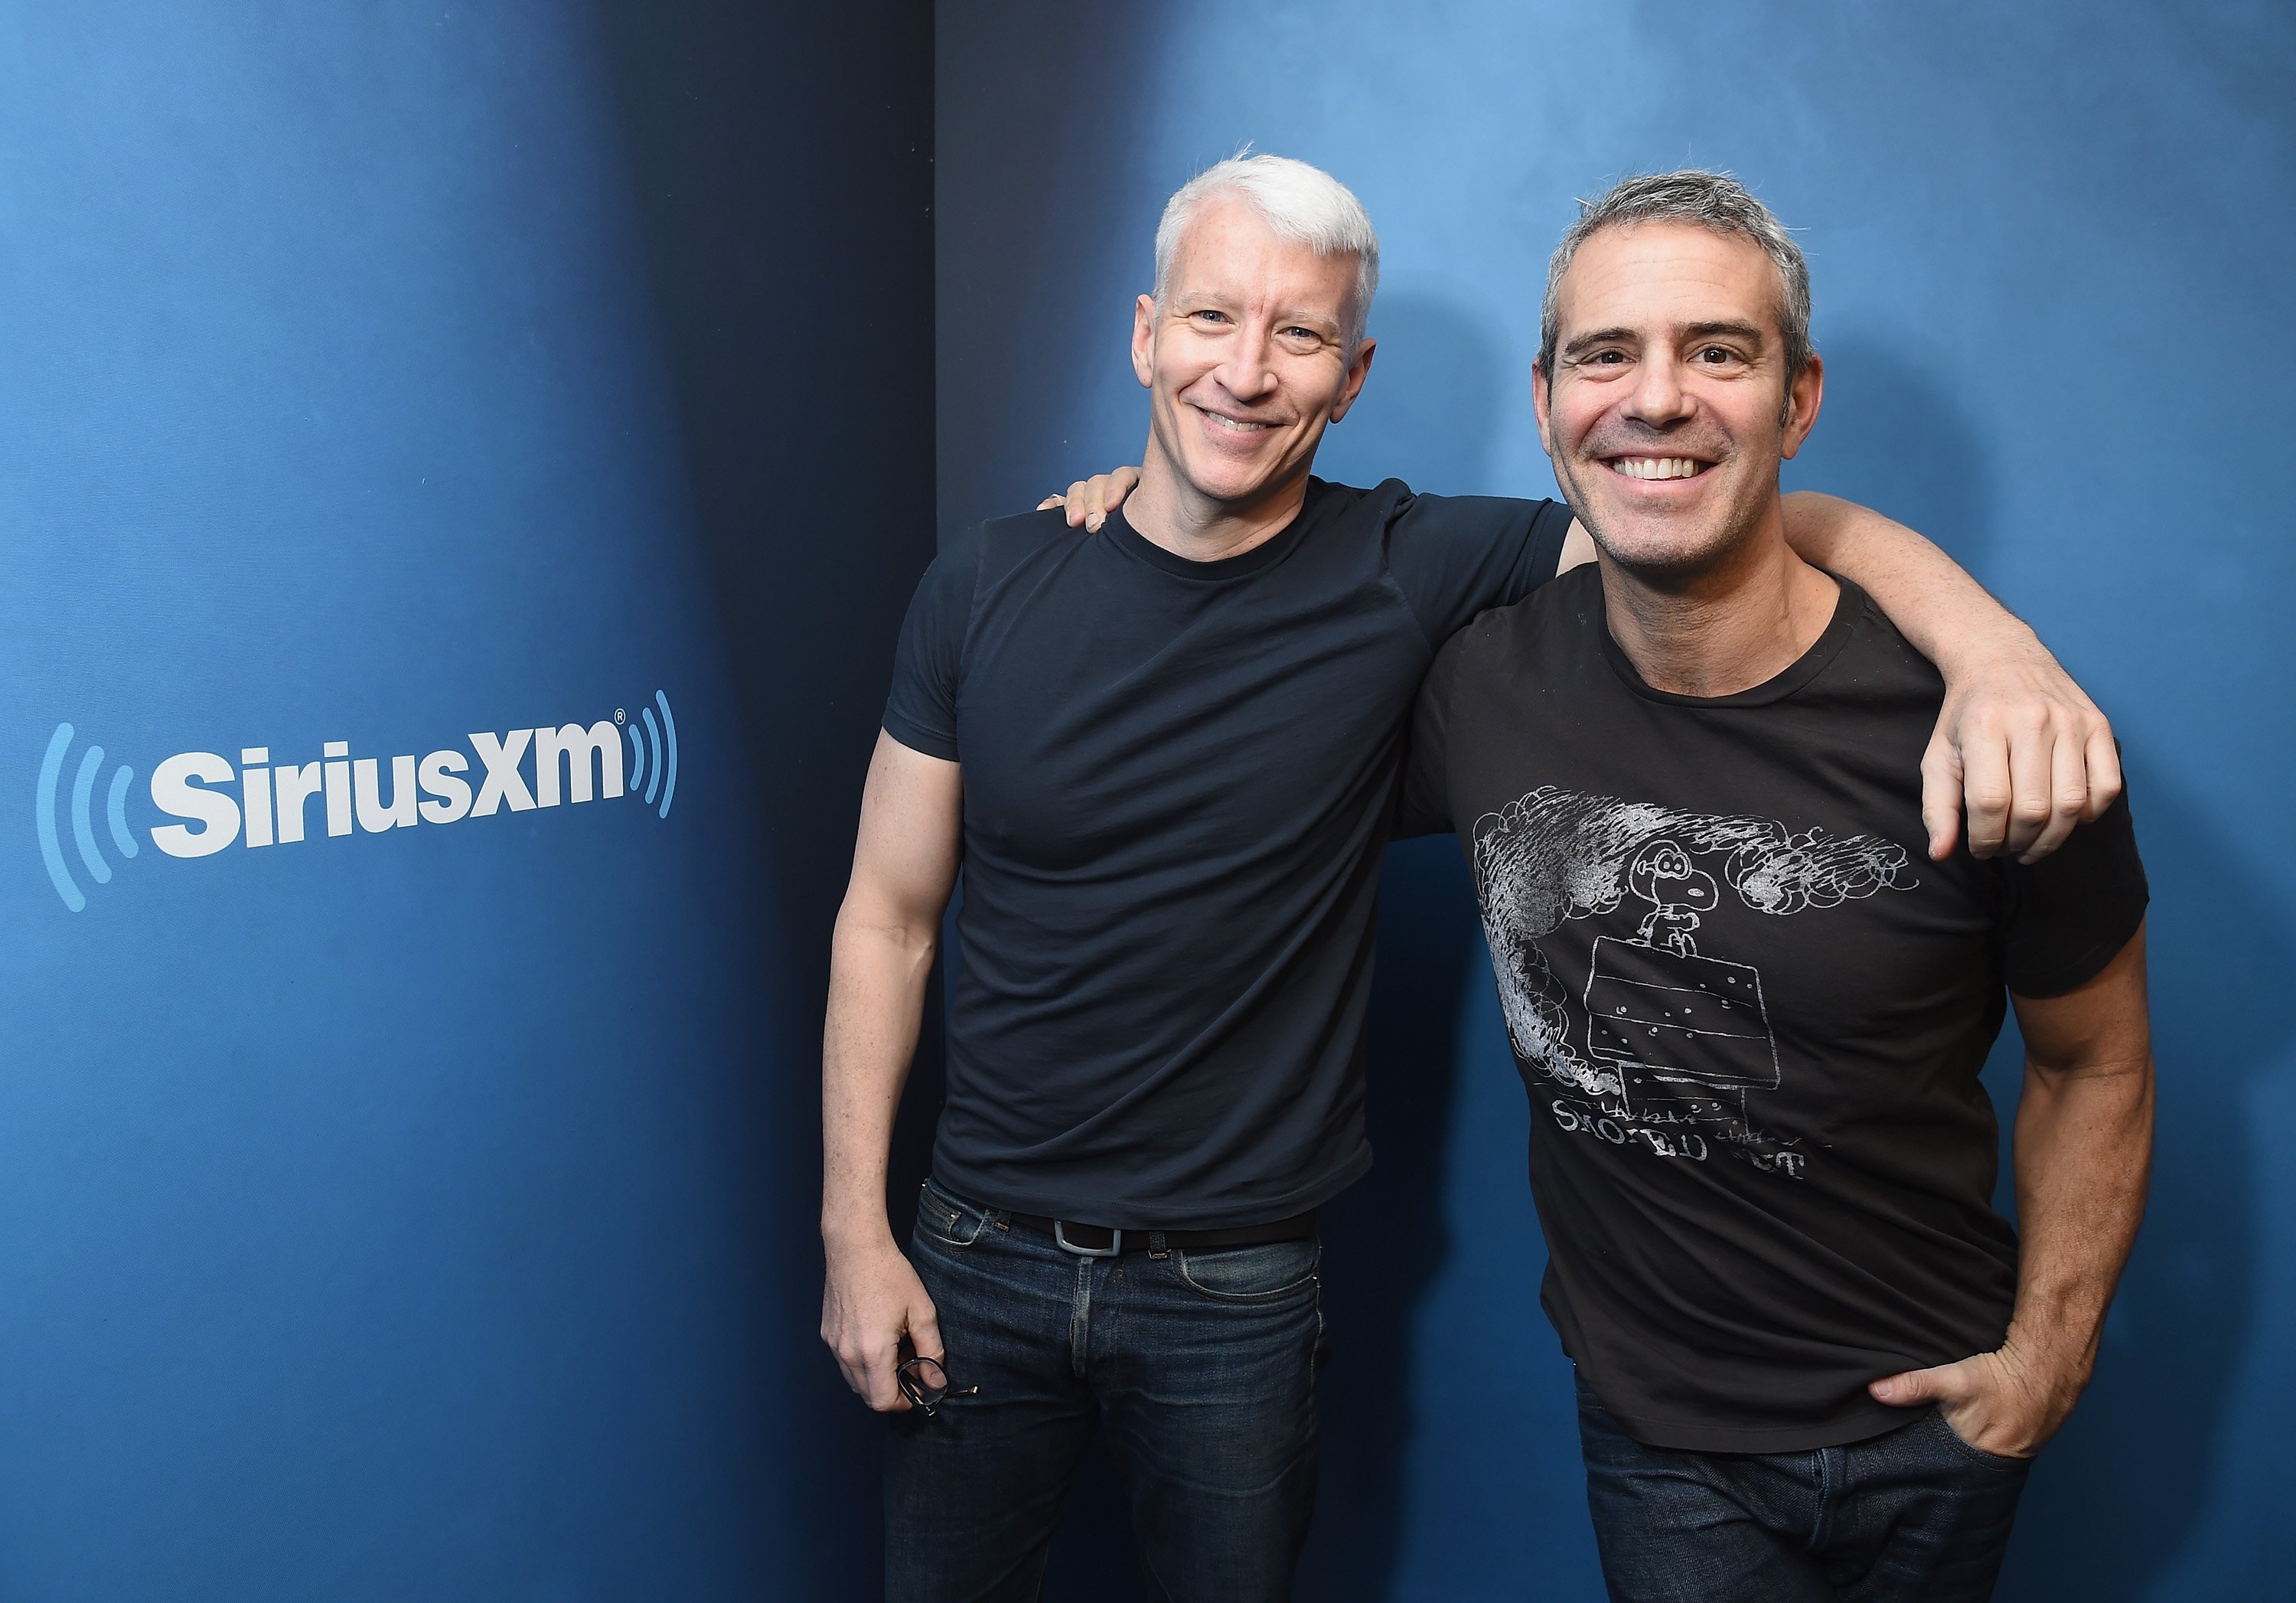 Anderson Cooper and Andy Cohen visit SiriusXM Studios in New York City on January 13, 2017 | Photo: Getty Images